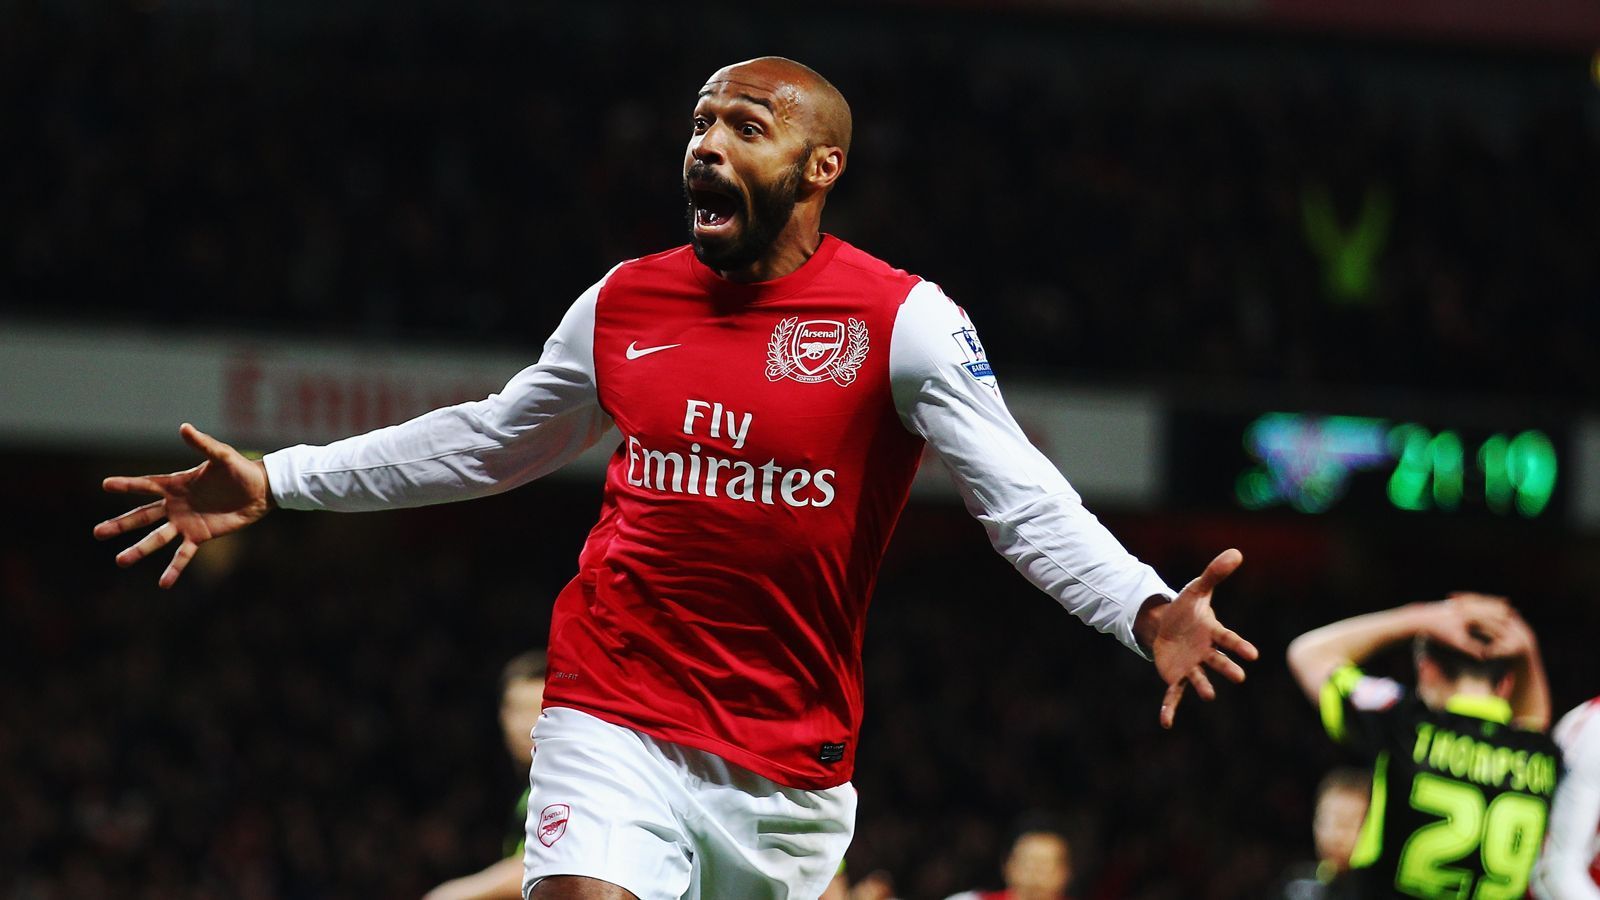 
                <strong>Platz 7: Thierry Henry</strong><br>
                Vereine: AS Monaco, FC Arsenal, FC Barcelona50 Tore in 112 Spielen 
              